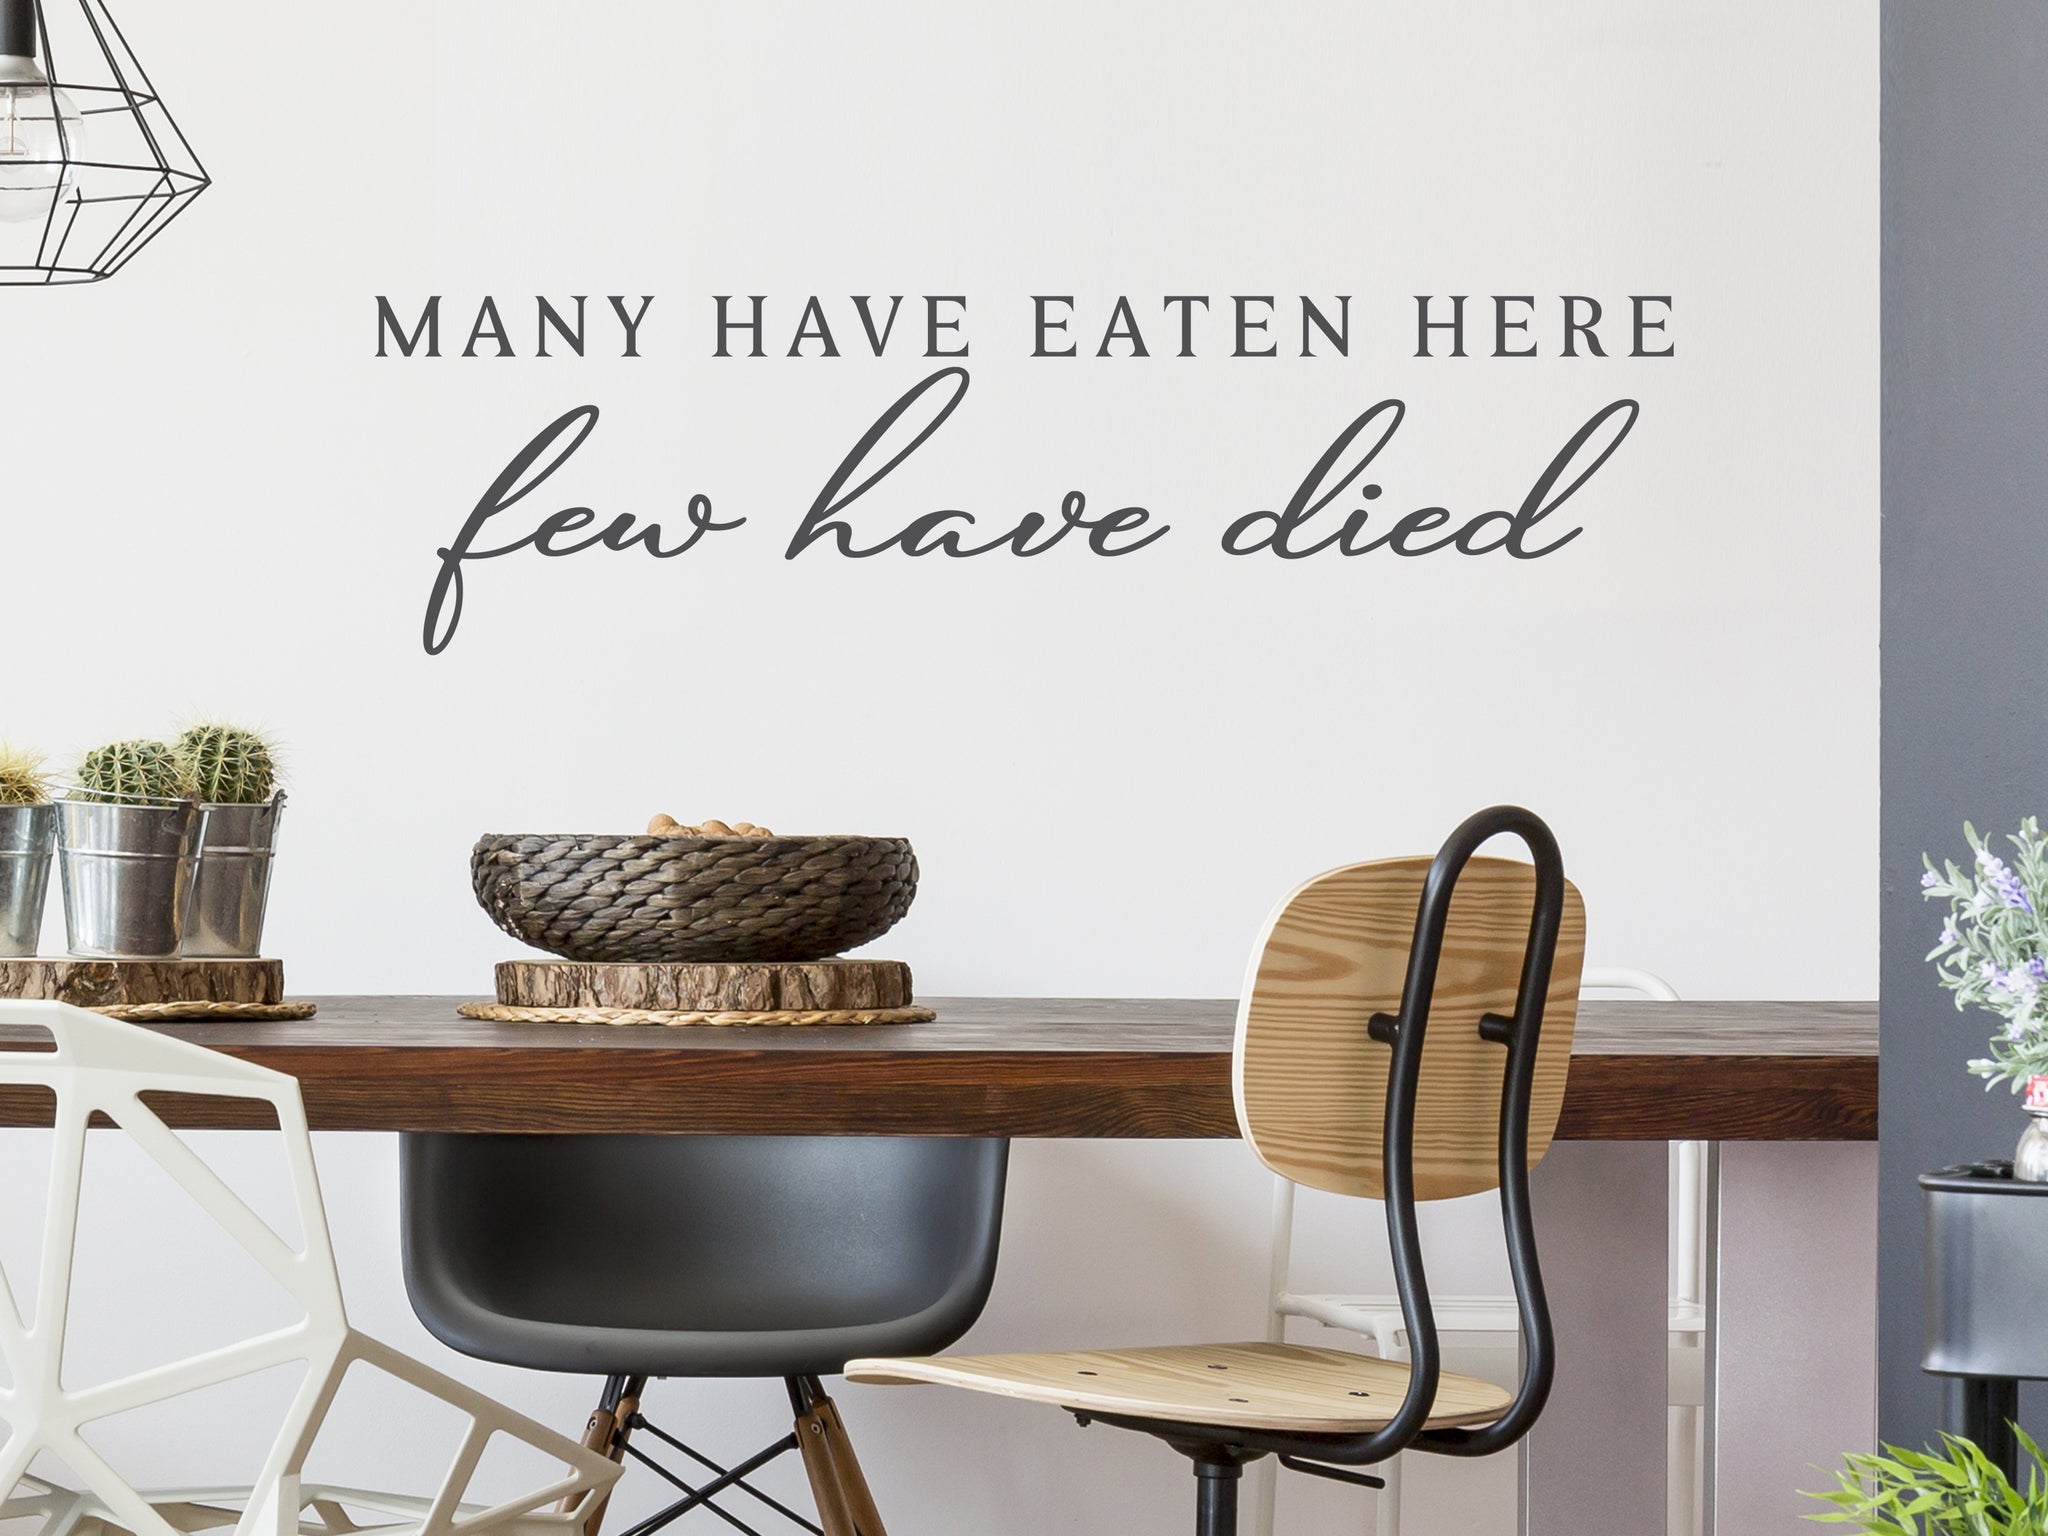 Kitchenaid Mixer Decal, Many Have Eaten Here Few Have Died Decal, Stand  Mixer Decal, Gift for Mom 